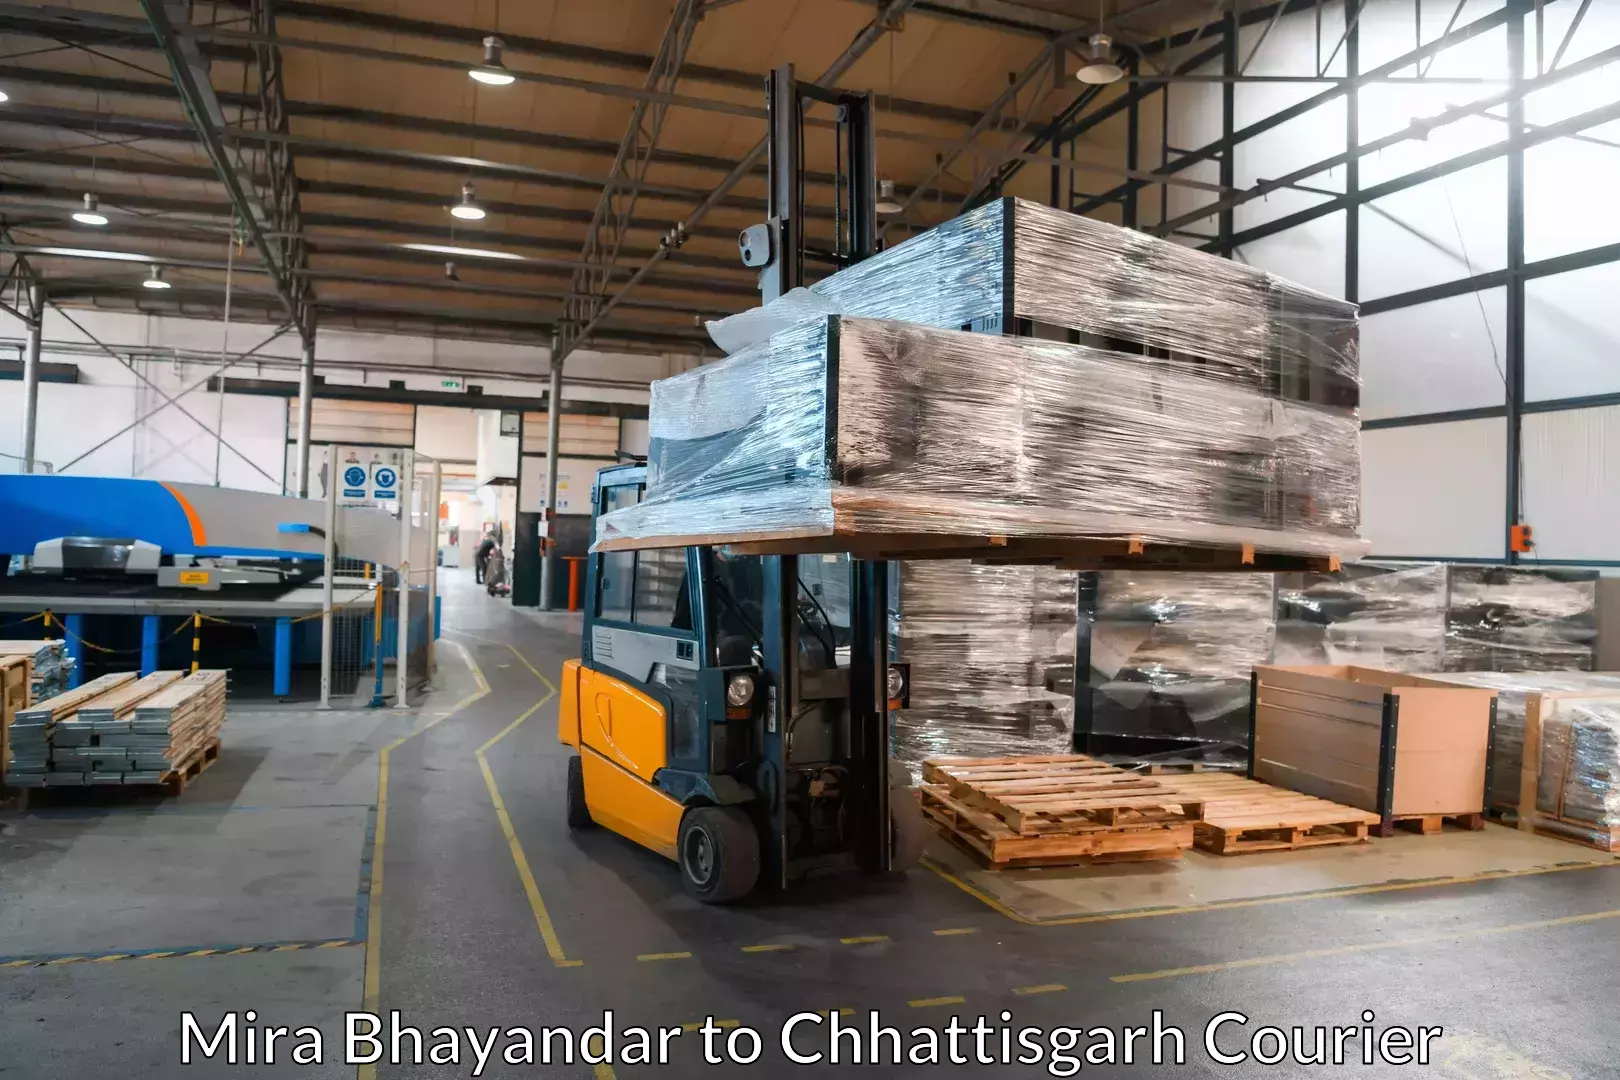 Furniture relocation experts Mira Bhayandar to Pendra